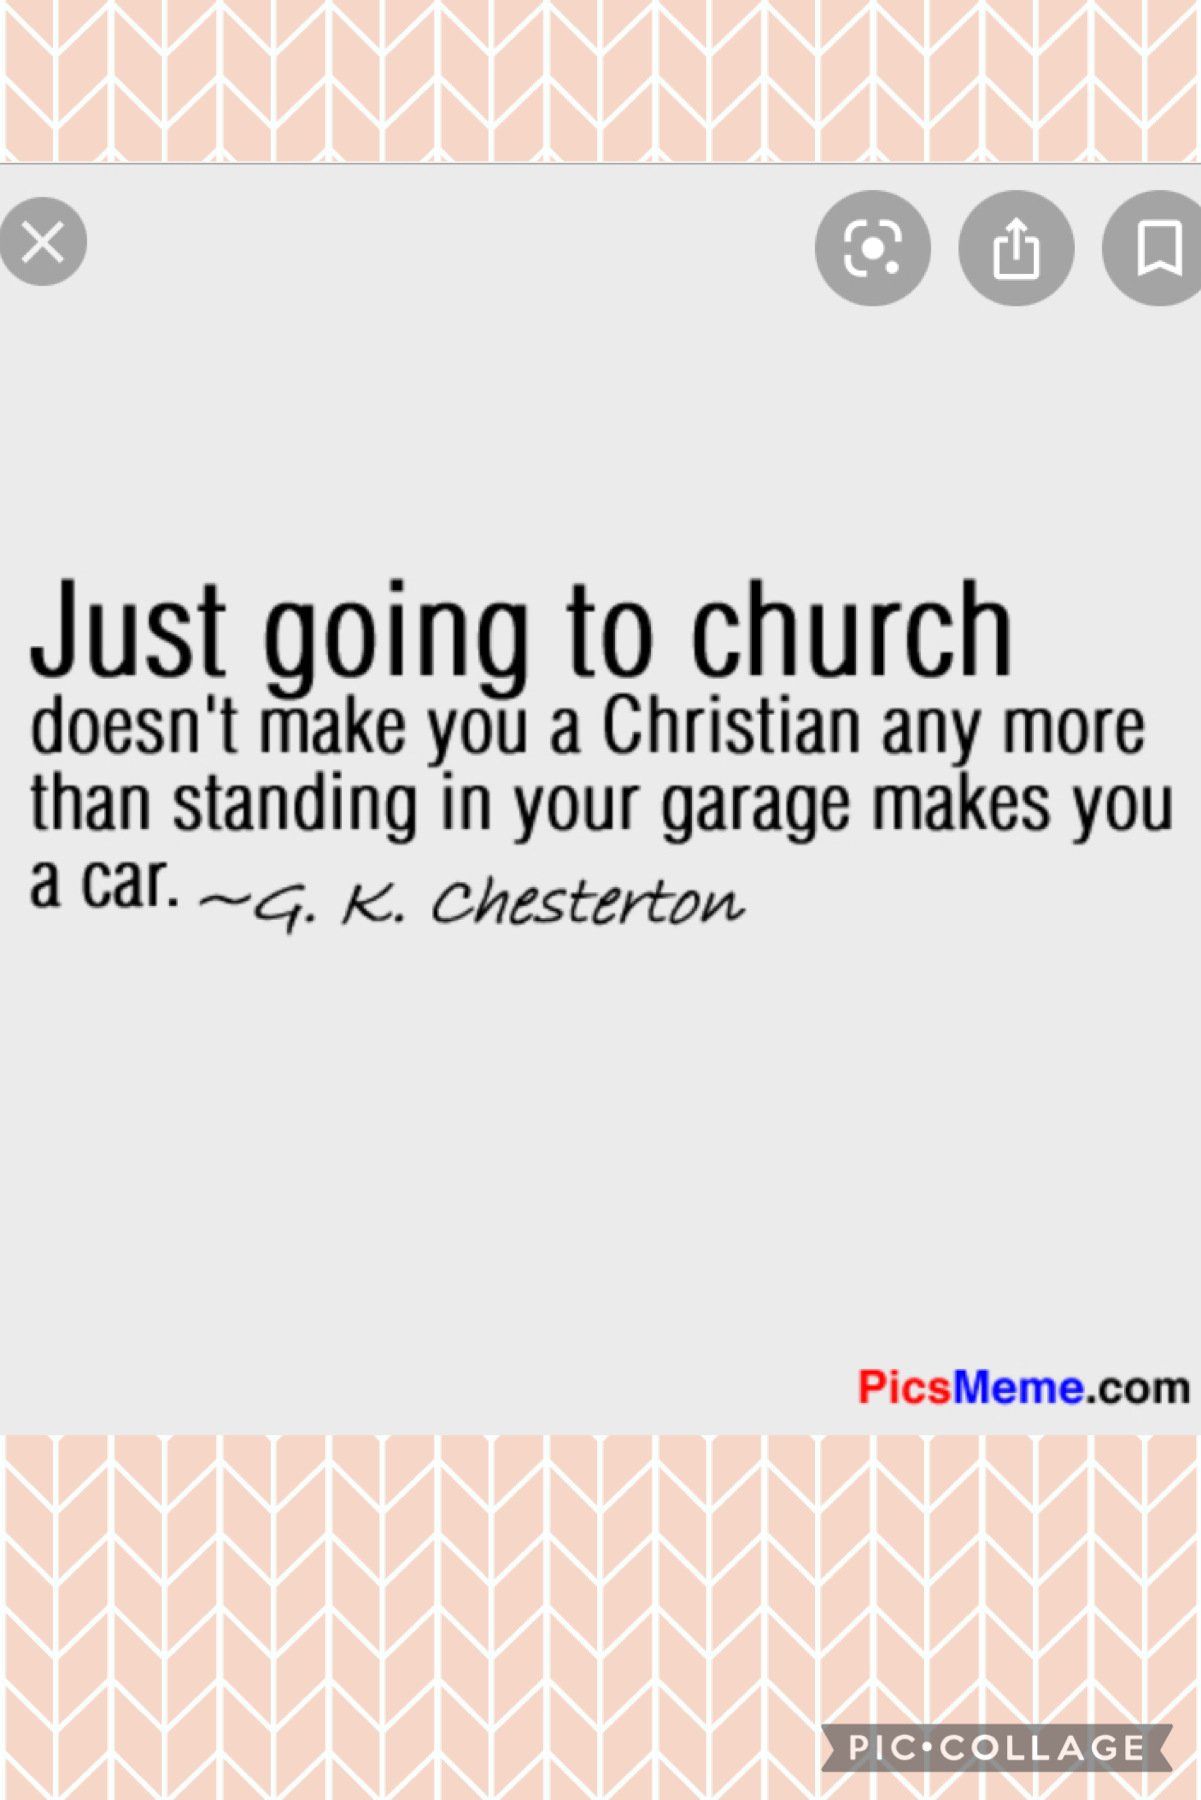 I found this quote and thought I would share this. But this not me judging anyone who doesn’t go to church.